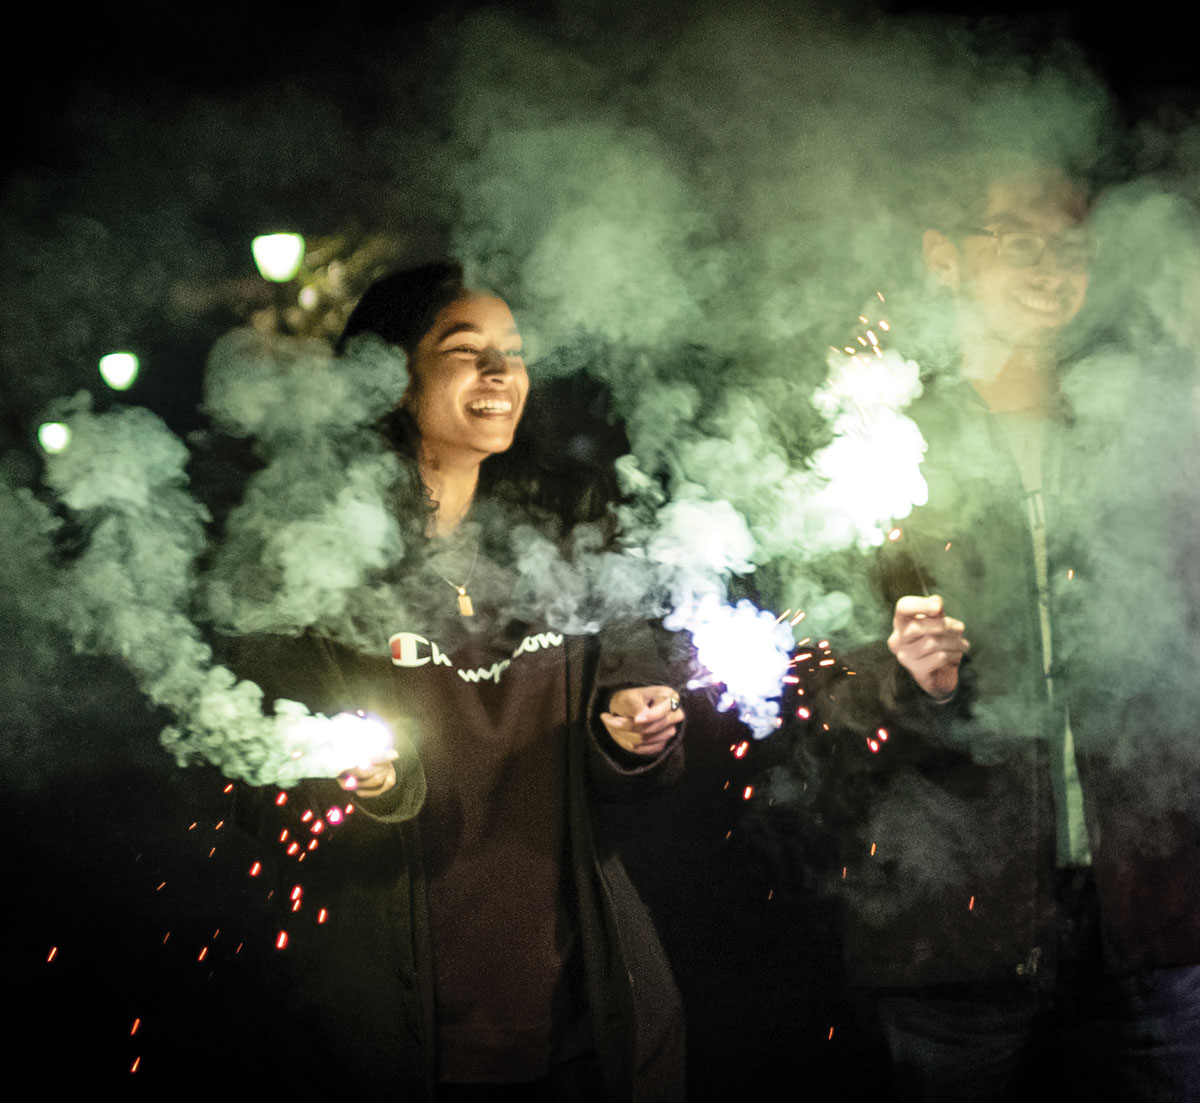 Two smiling students are surrounded by smoke as they hold sparklers outside at nighttime